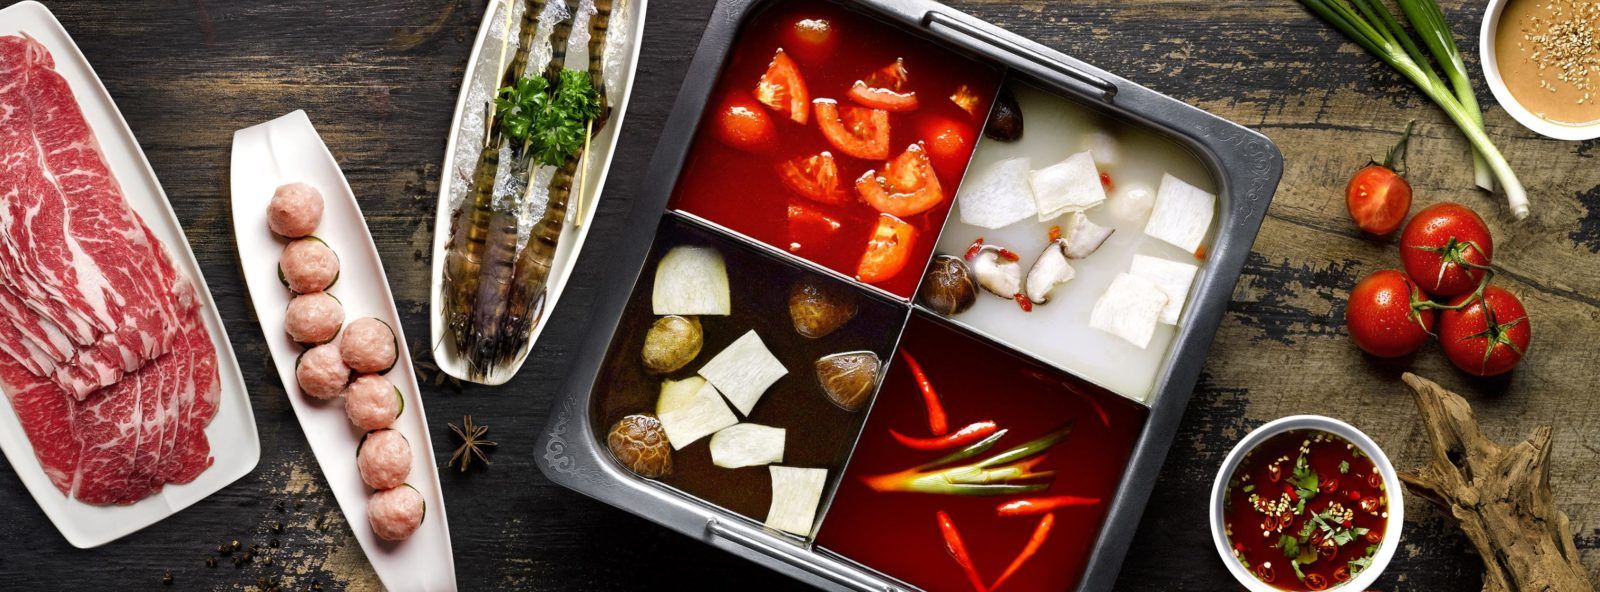 Hotpot restaurants in Singapore are now delivering sets to your home